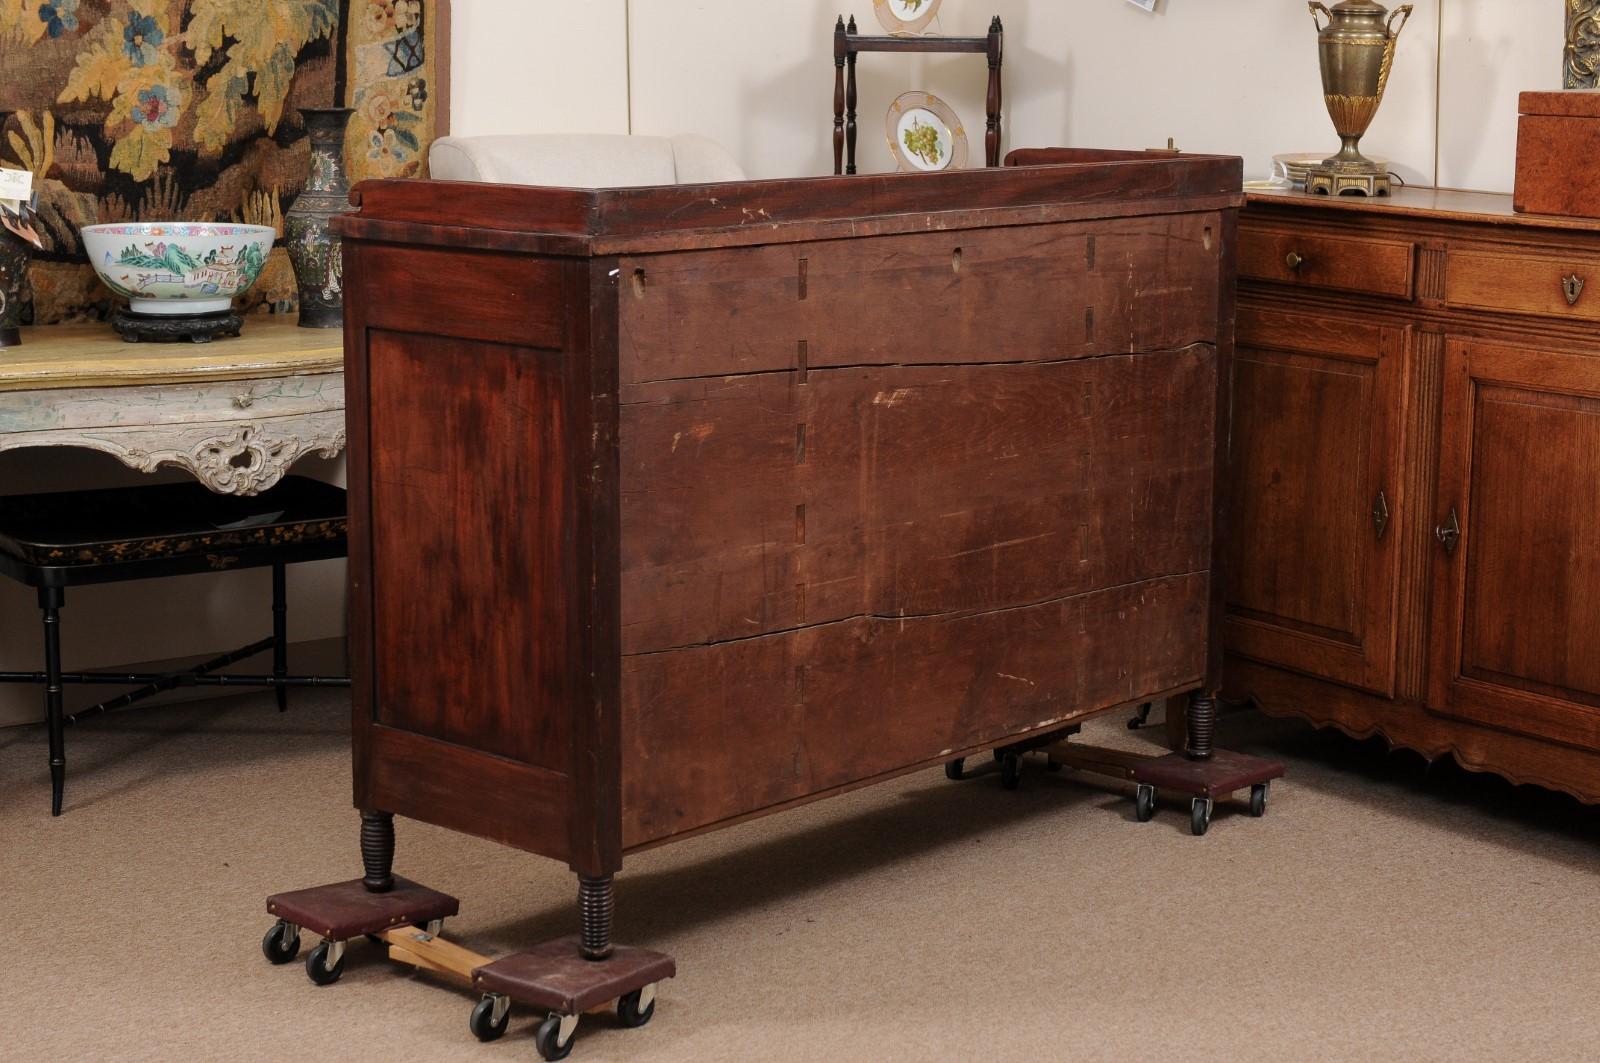 19th Century American Sheraton Sideboard in Mahogany with 4 Cabinet Doors 5